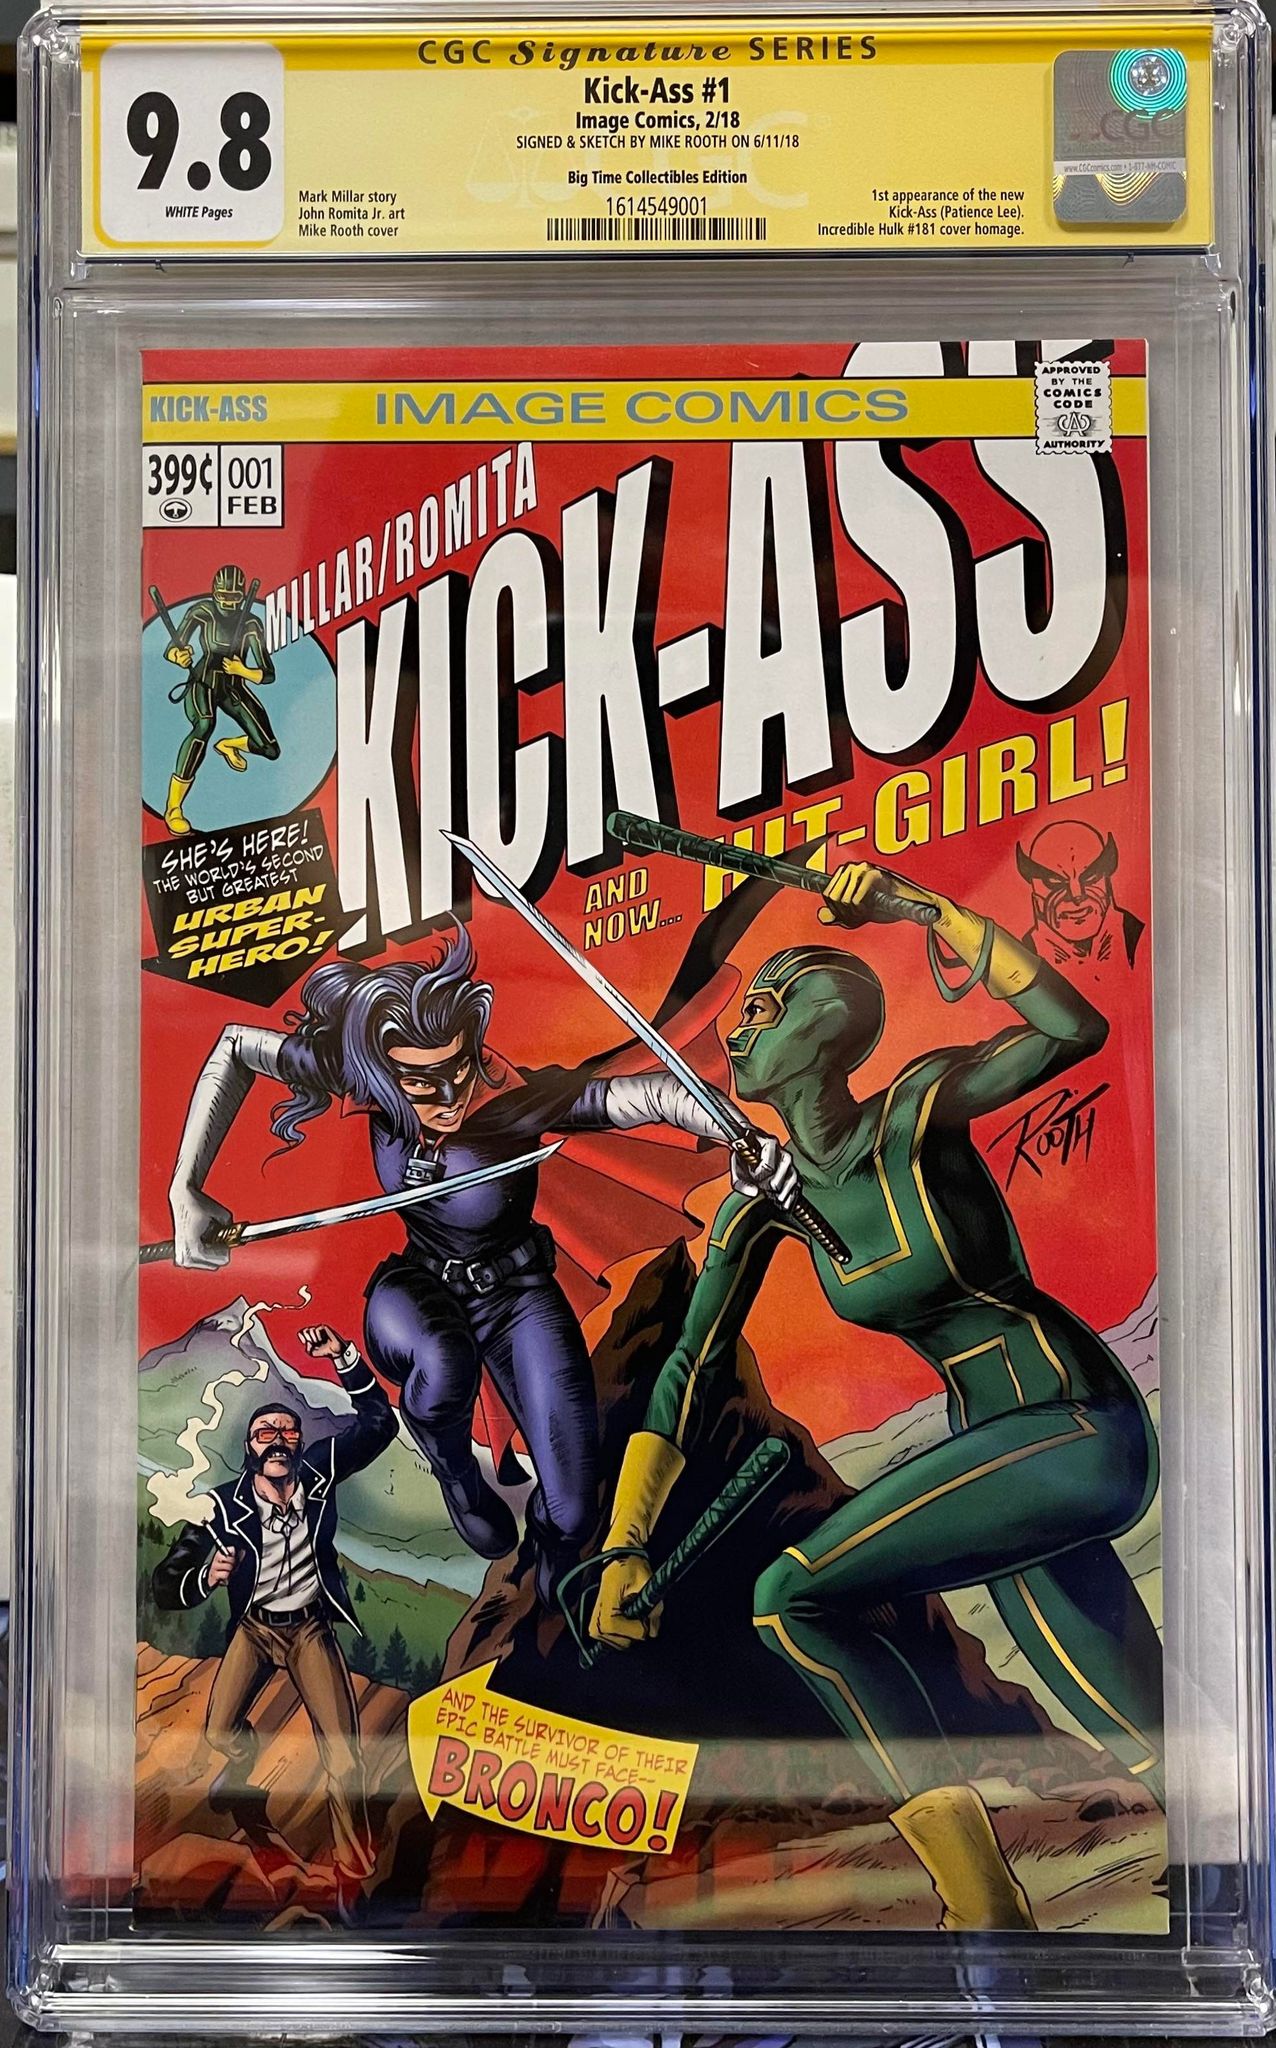 KICK-ASS #1 BTC EXCLUSIVE COVER CGC 9.8 W/WOLVERINE REMARK BY MIKE ROOTH